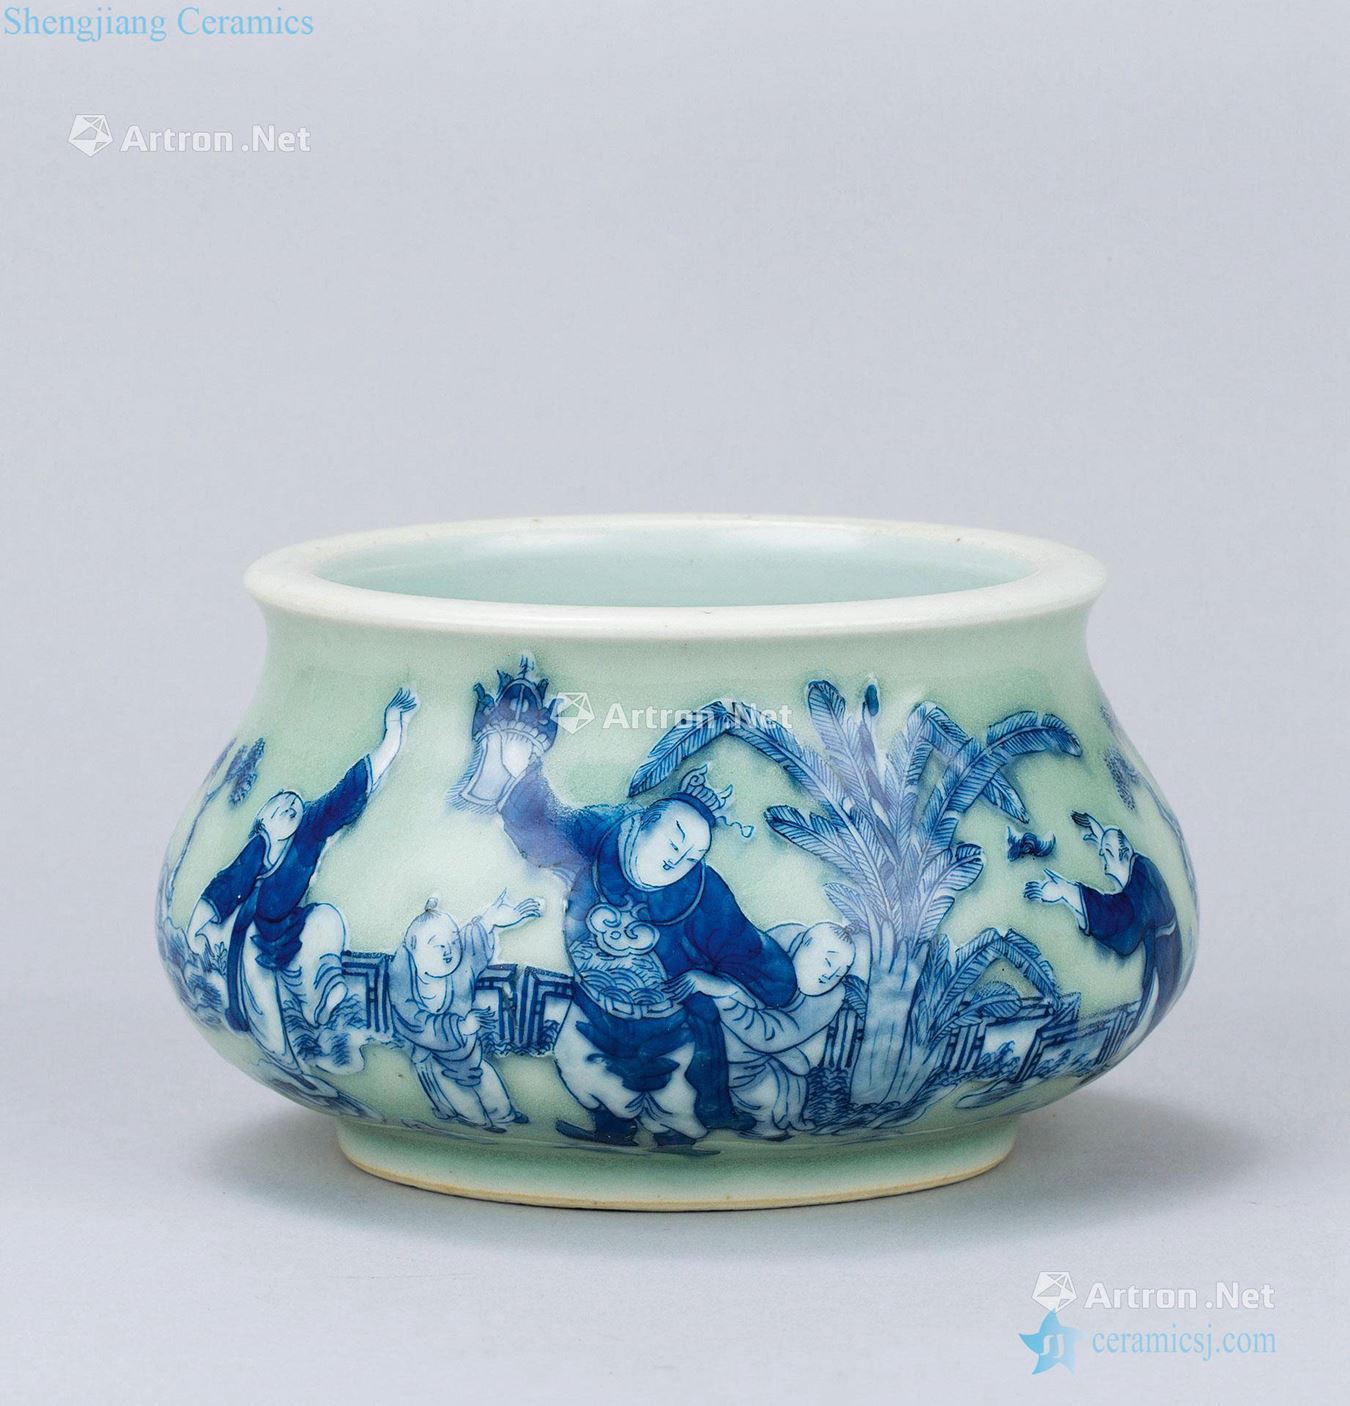 In the qing dynasty (1644-1911) WenXiangLu pea green to blue and white characters